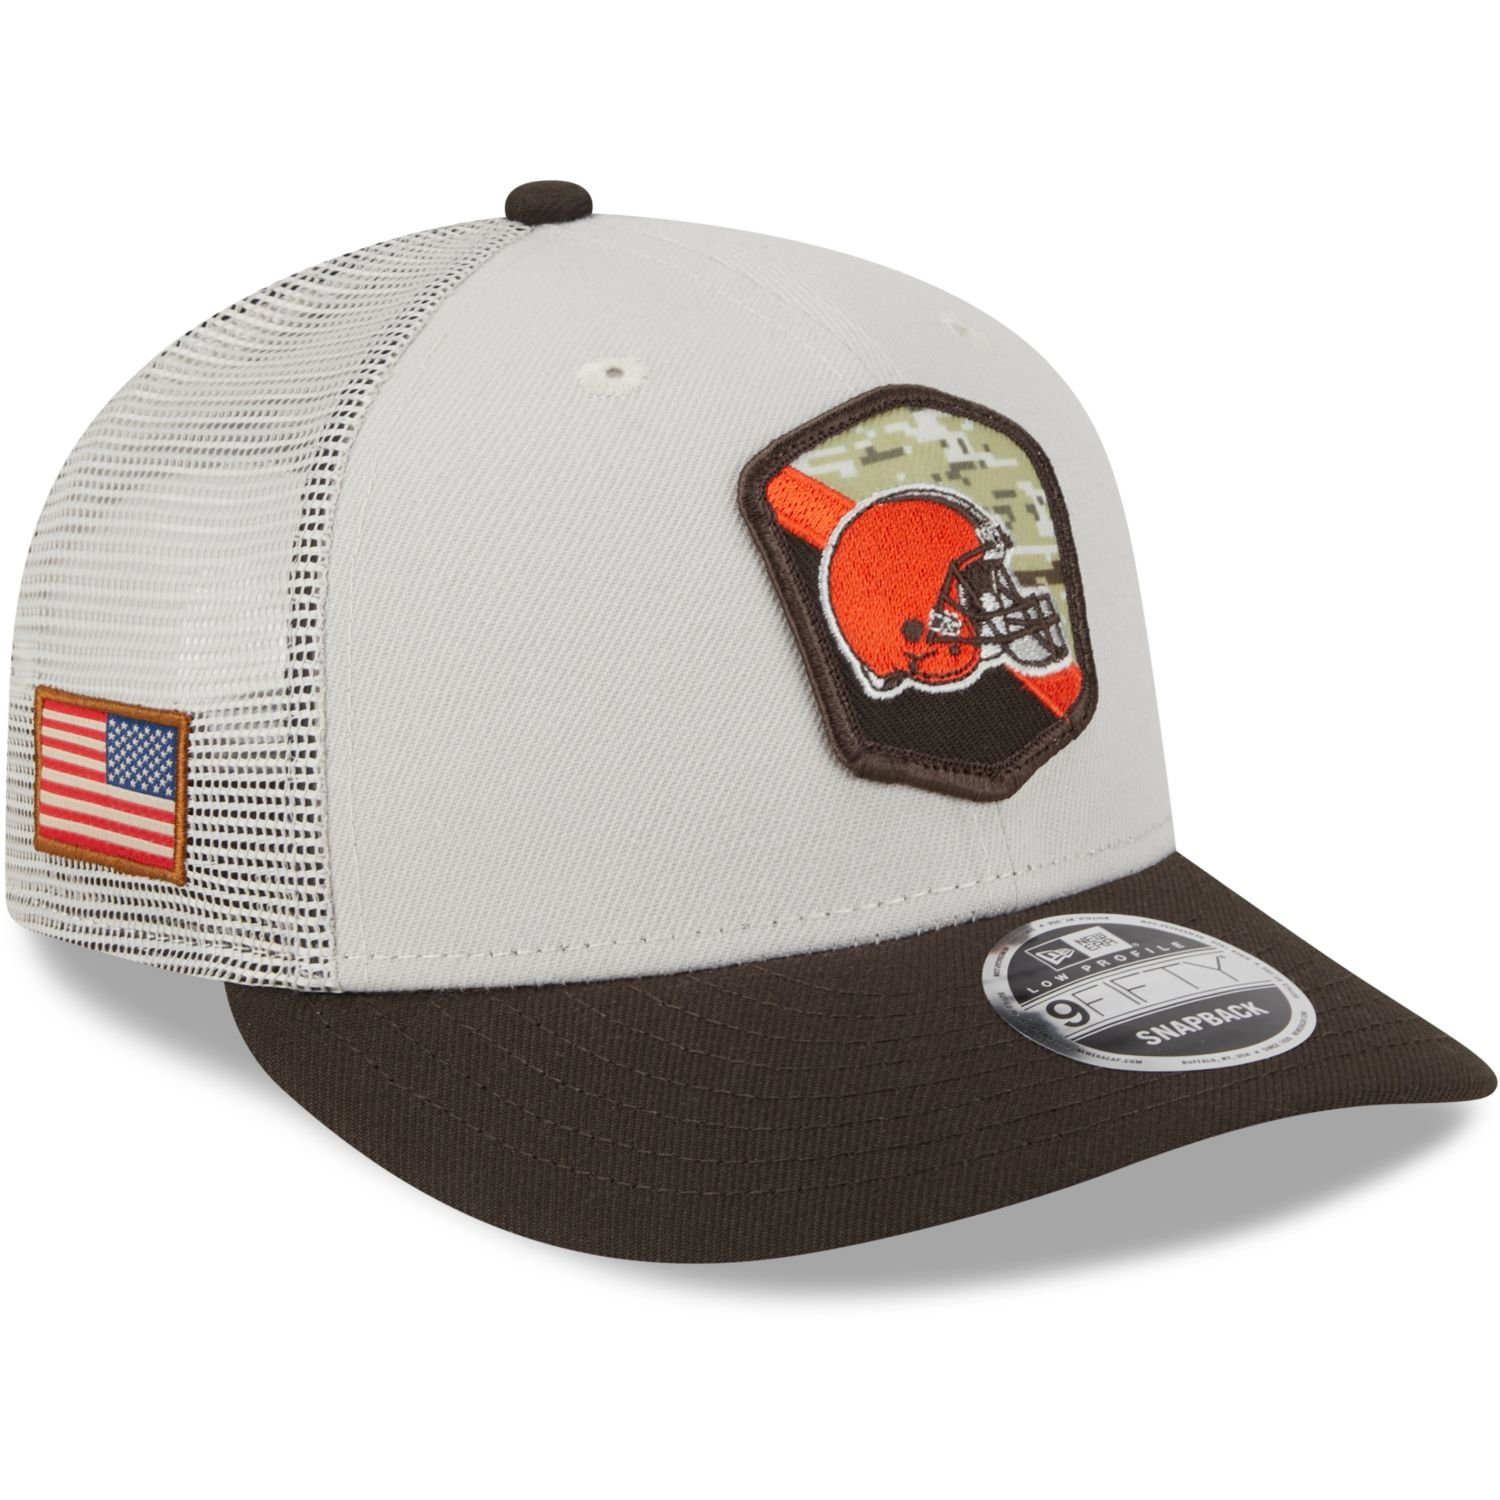 New Era Snapback Cap 9Fifty Low Profile Snap NFL Salute to Service Cleveland Browns